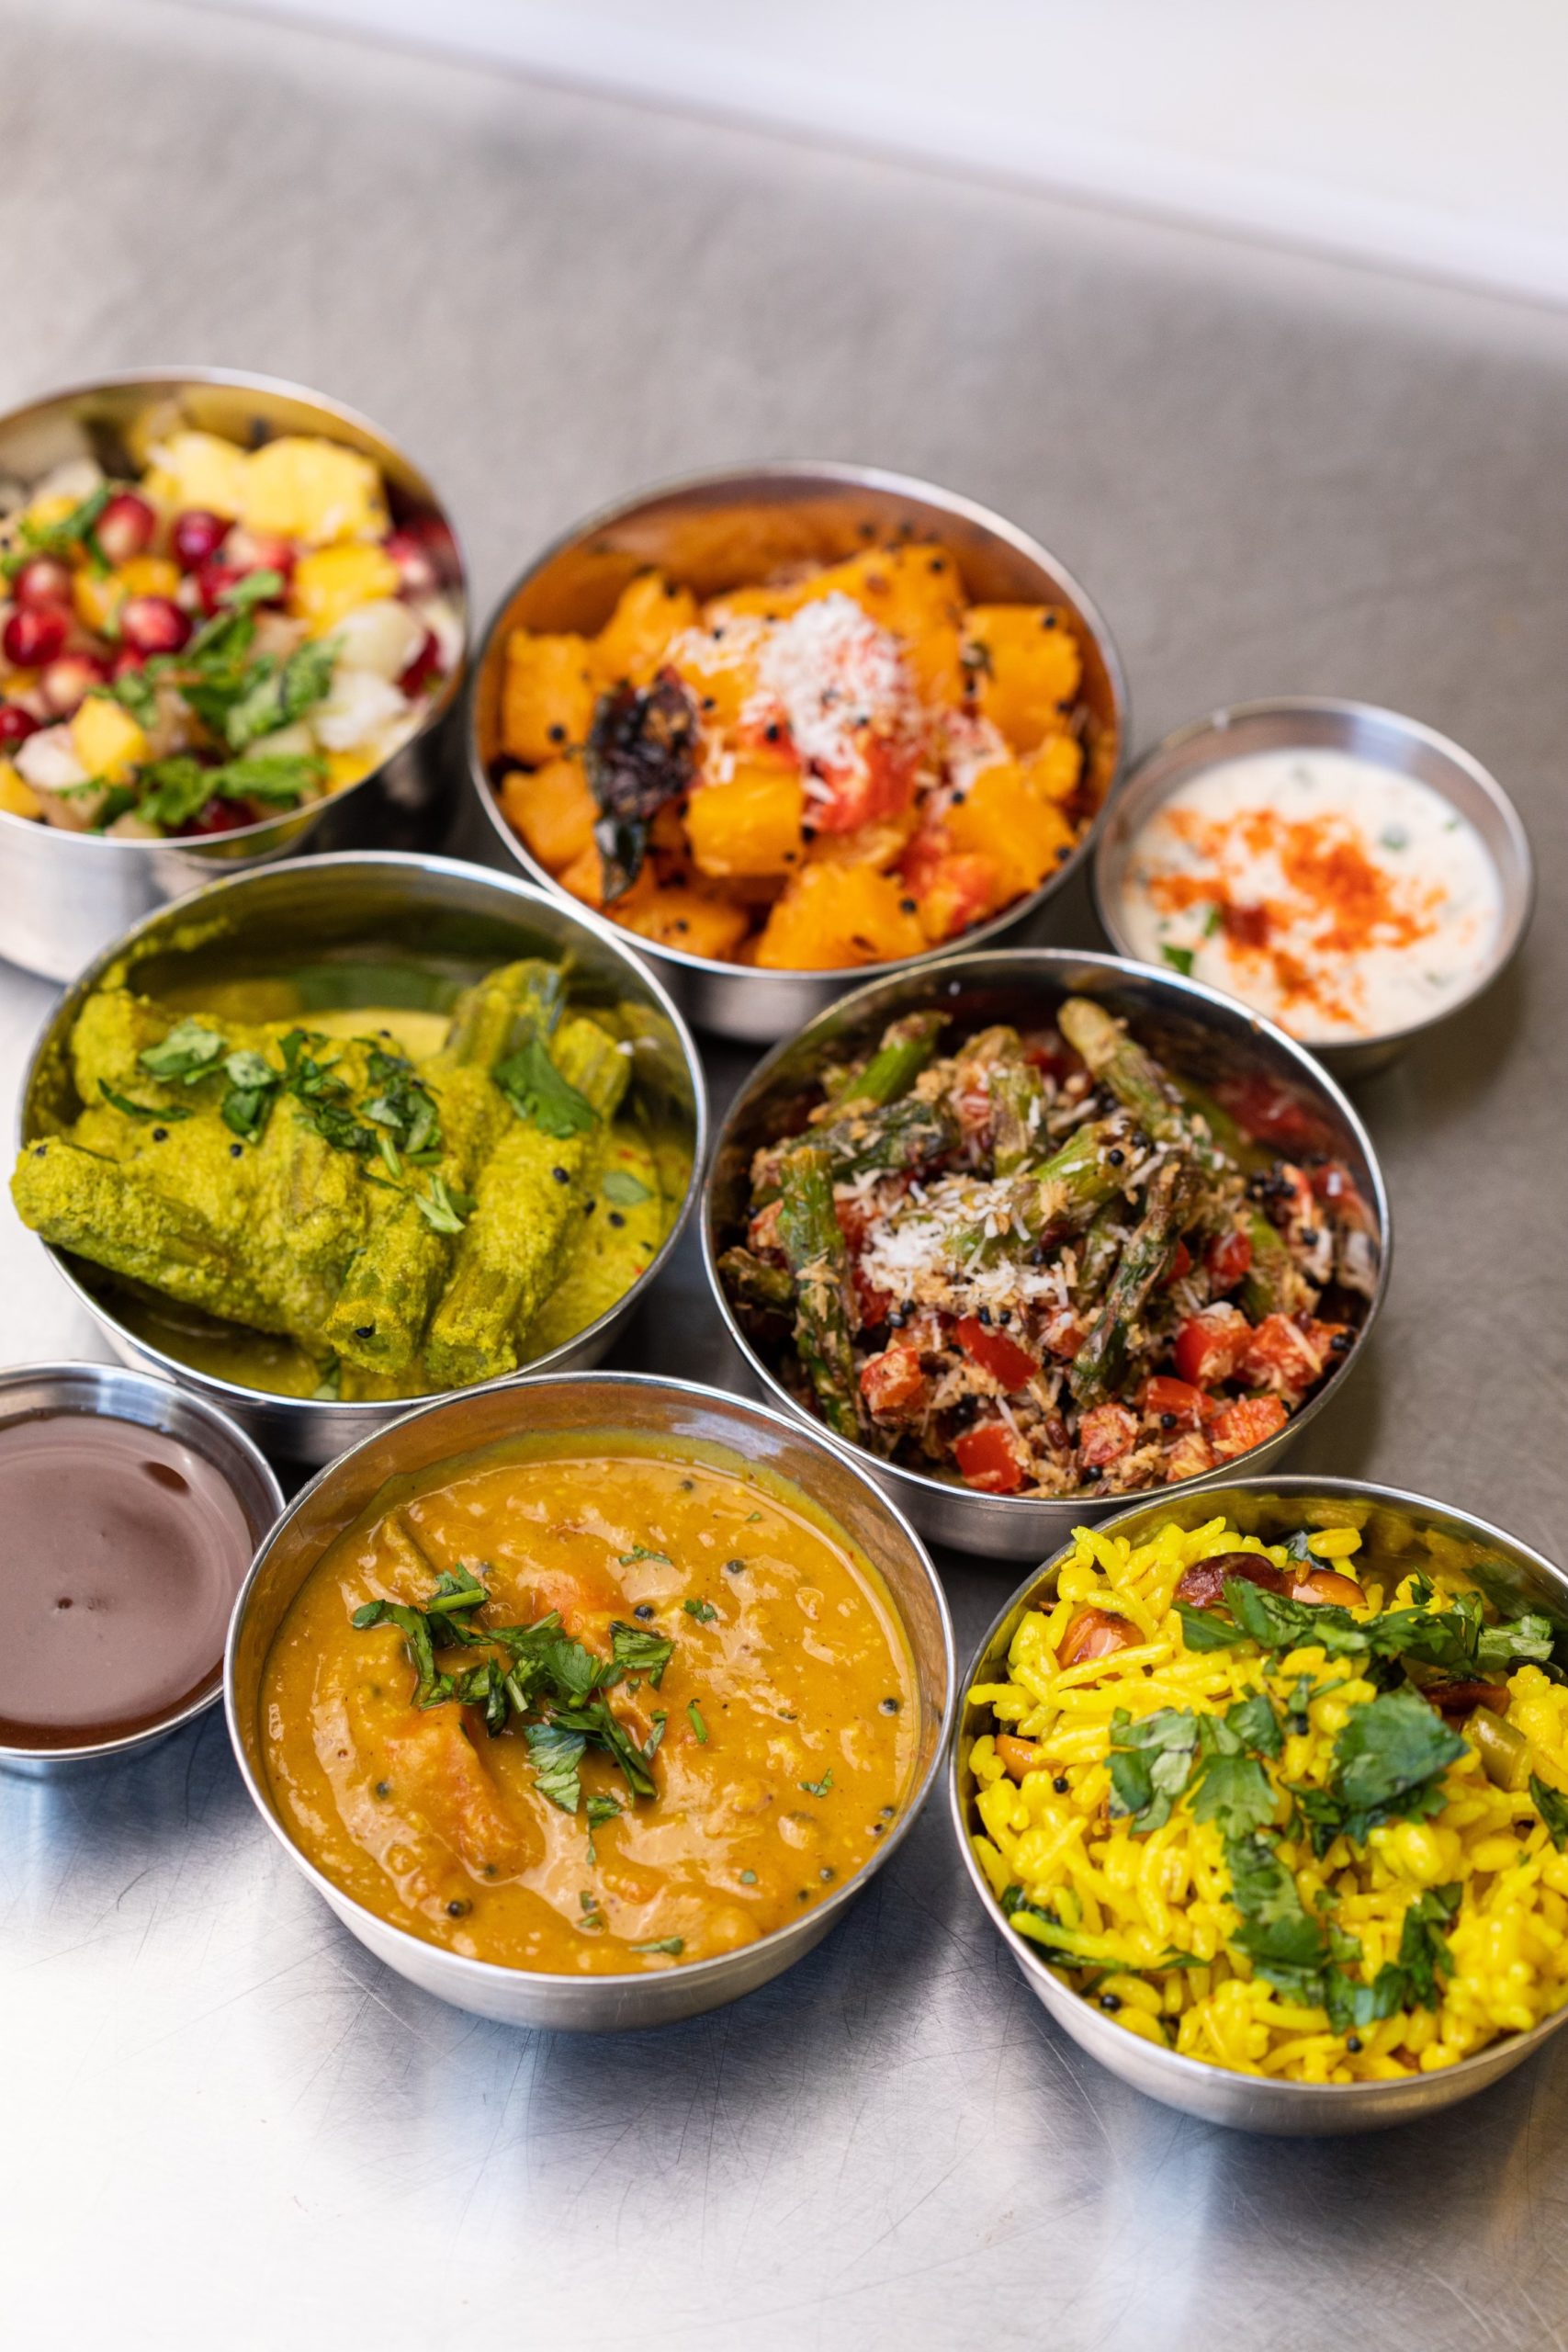 Corey DeRosa uses high quality ingredients to create his Tapovana lunch boxes, which include South Indian recipes that follow Ayurvedic principles of eating.